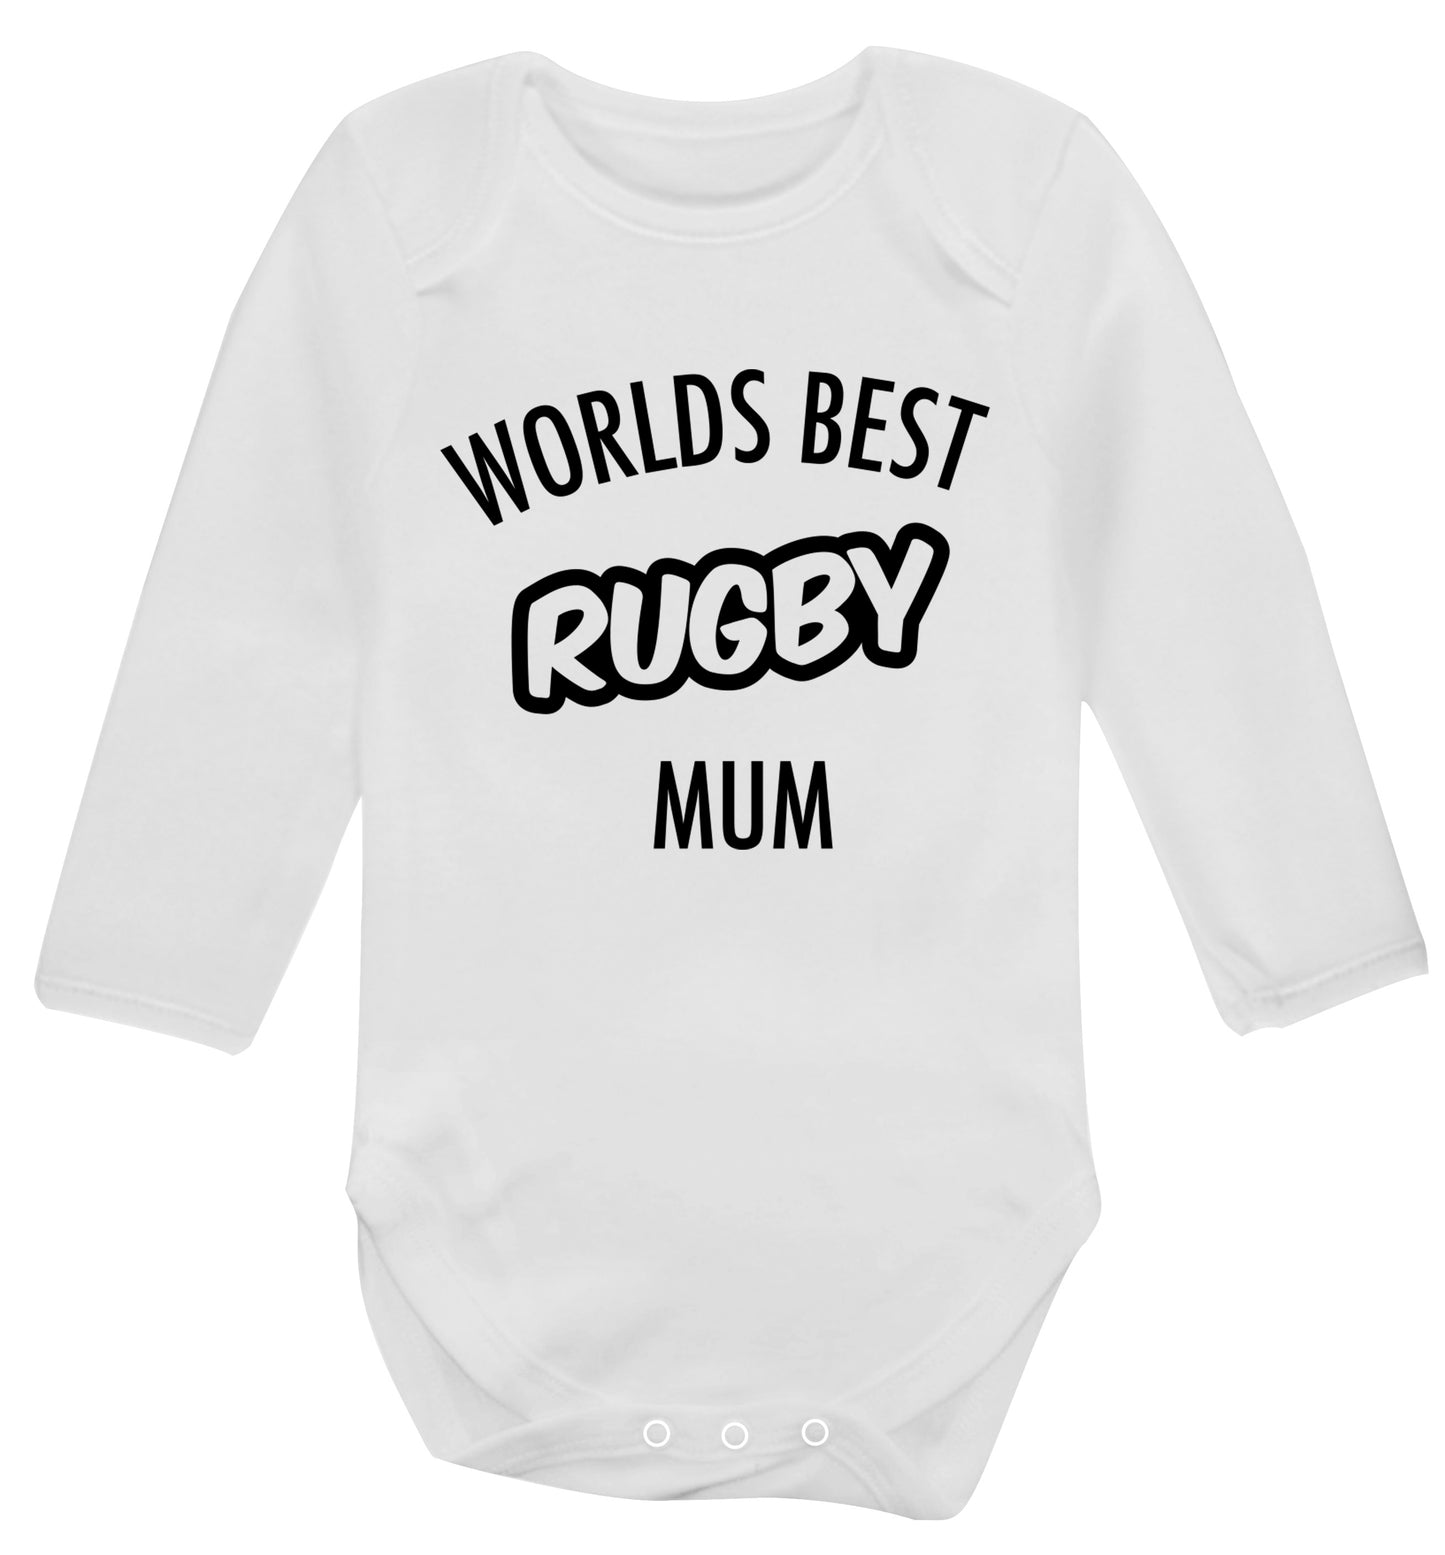 Worlds best rugby mum Baby Vest long sleeved white 6-12 months